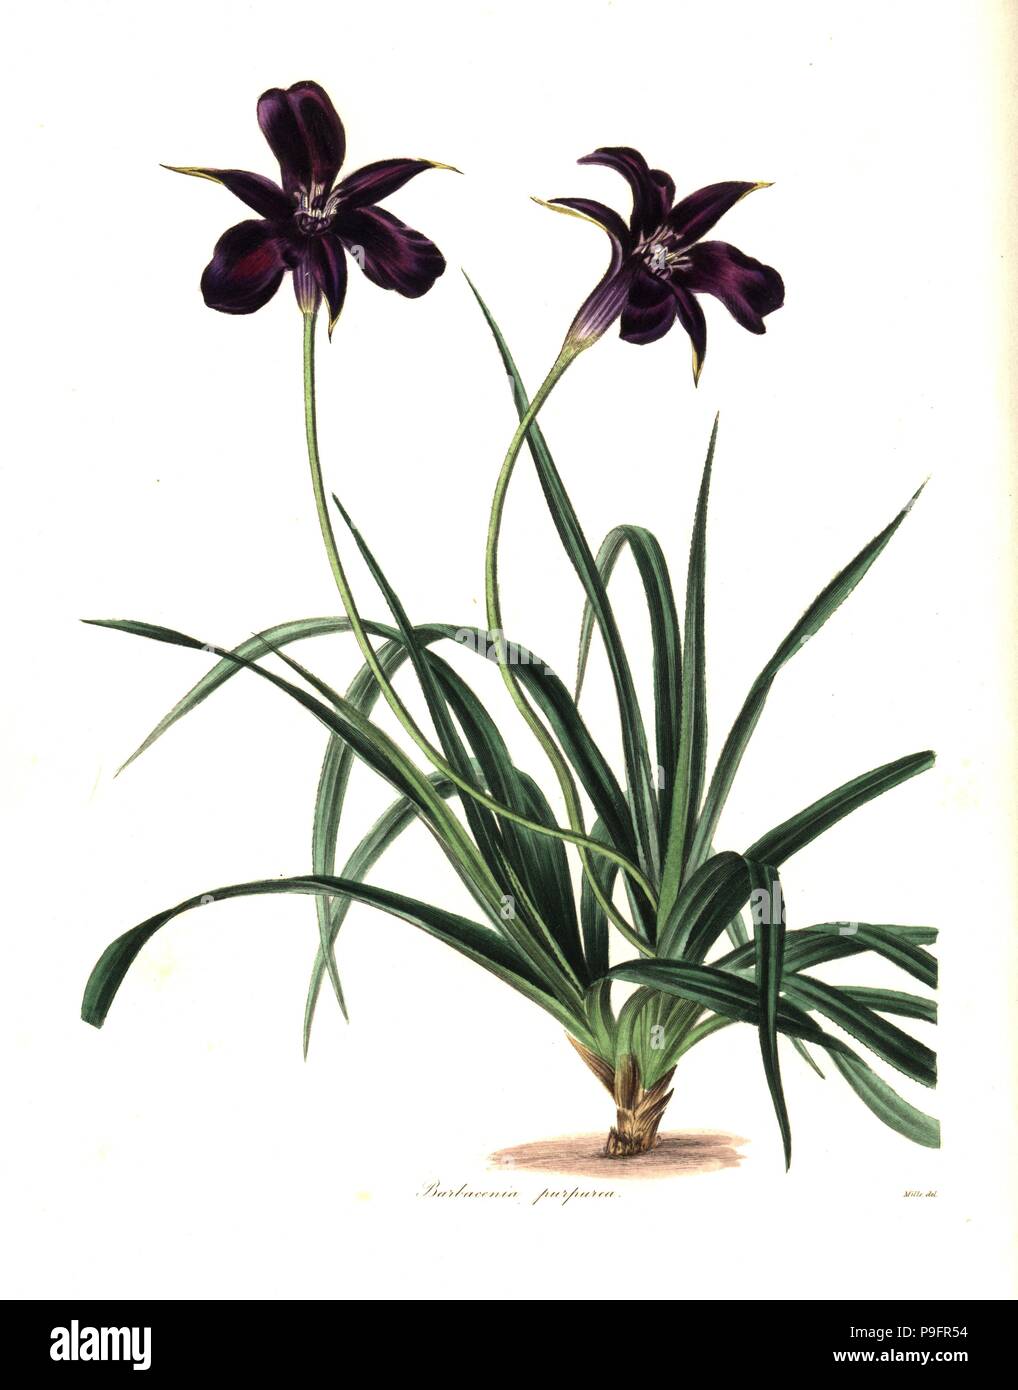 Purple-flowered barbacenia, Barbacenia purpurea. Handcoloured copperplate engraving after a botanical illustration by Mills from Benjamin Maund and the Rev. John Stevens Henslow's The Botanist, London, 1836. Stock Photo